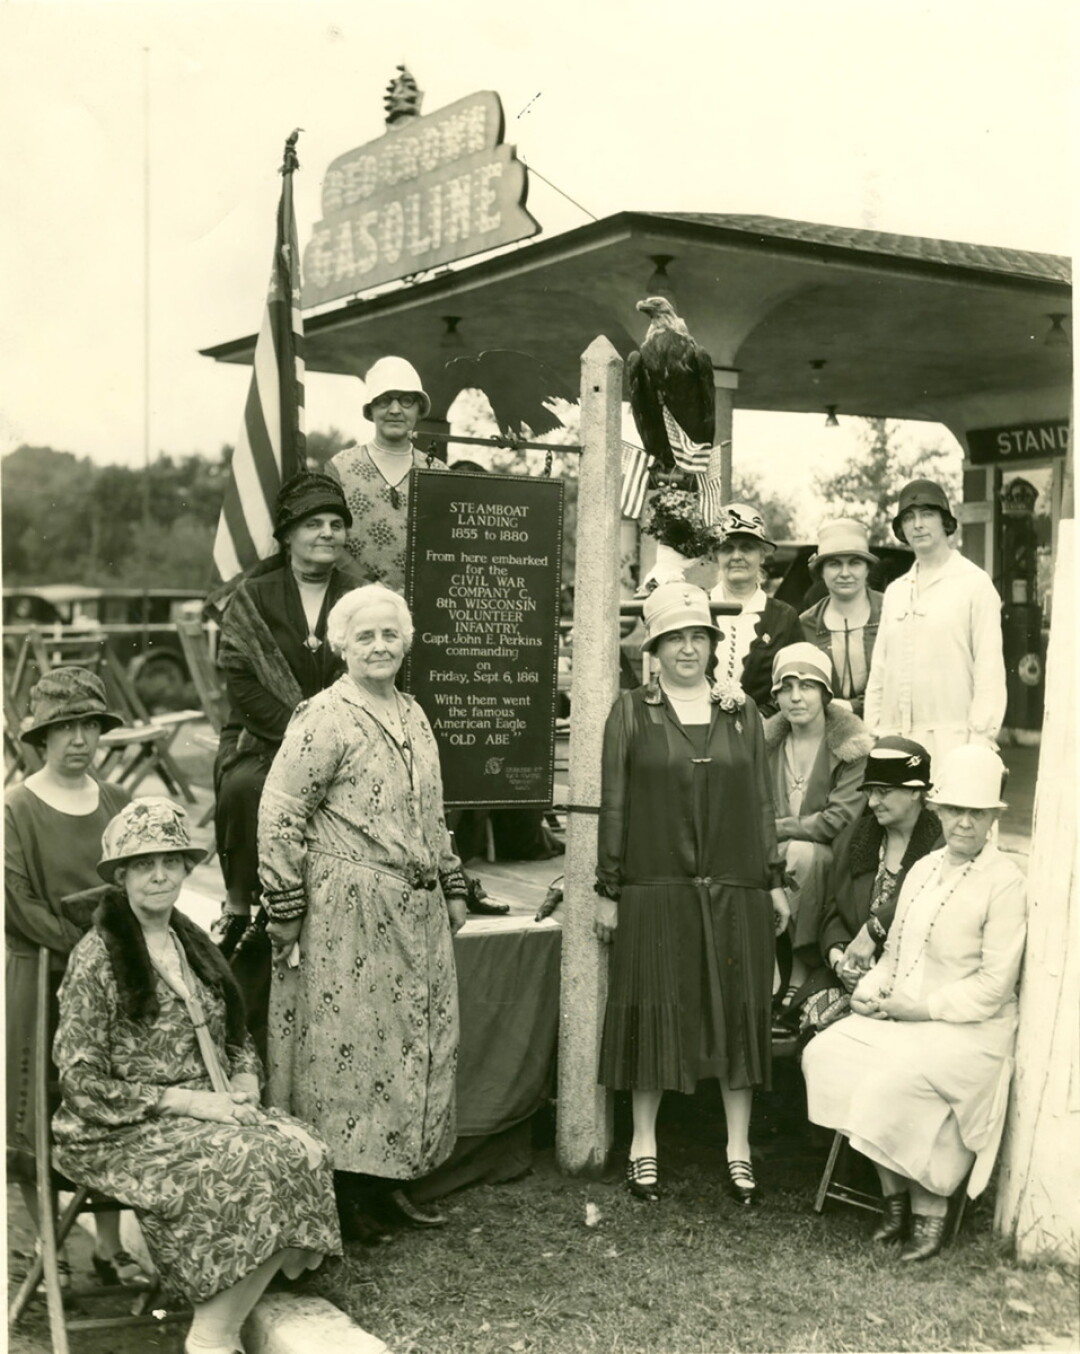 HAT’S OFF TO THEM. Members of the Eau Claire Chapter of the Daughters of the American Revolution gathered to dedicate a historical marker at the Gray Street steamboat landing in 1927 (top) and during a 2018 meeting.